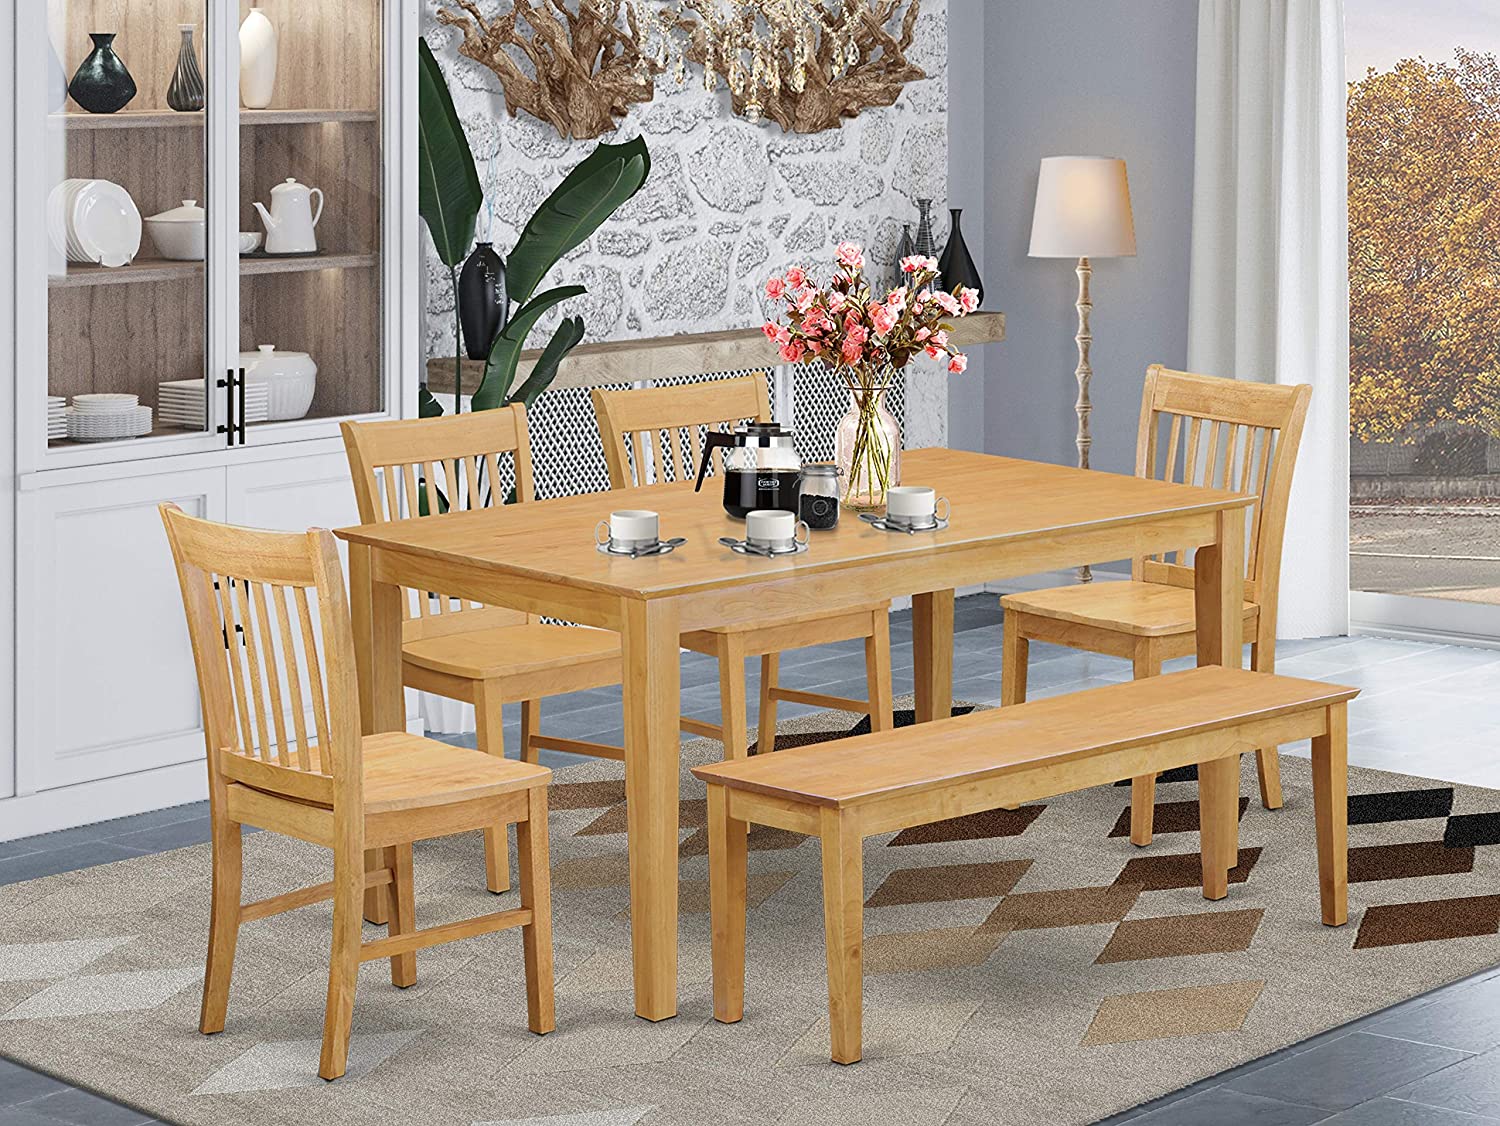 Amazon.com - East West Furniture Rectangular Dining Table Set 6 Pc - Wooden Modern Dining Chairs Seat - Oak Finish Dining Room Table and Bench - Table & Chair Sets